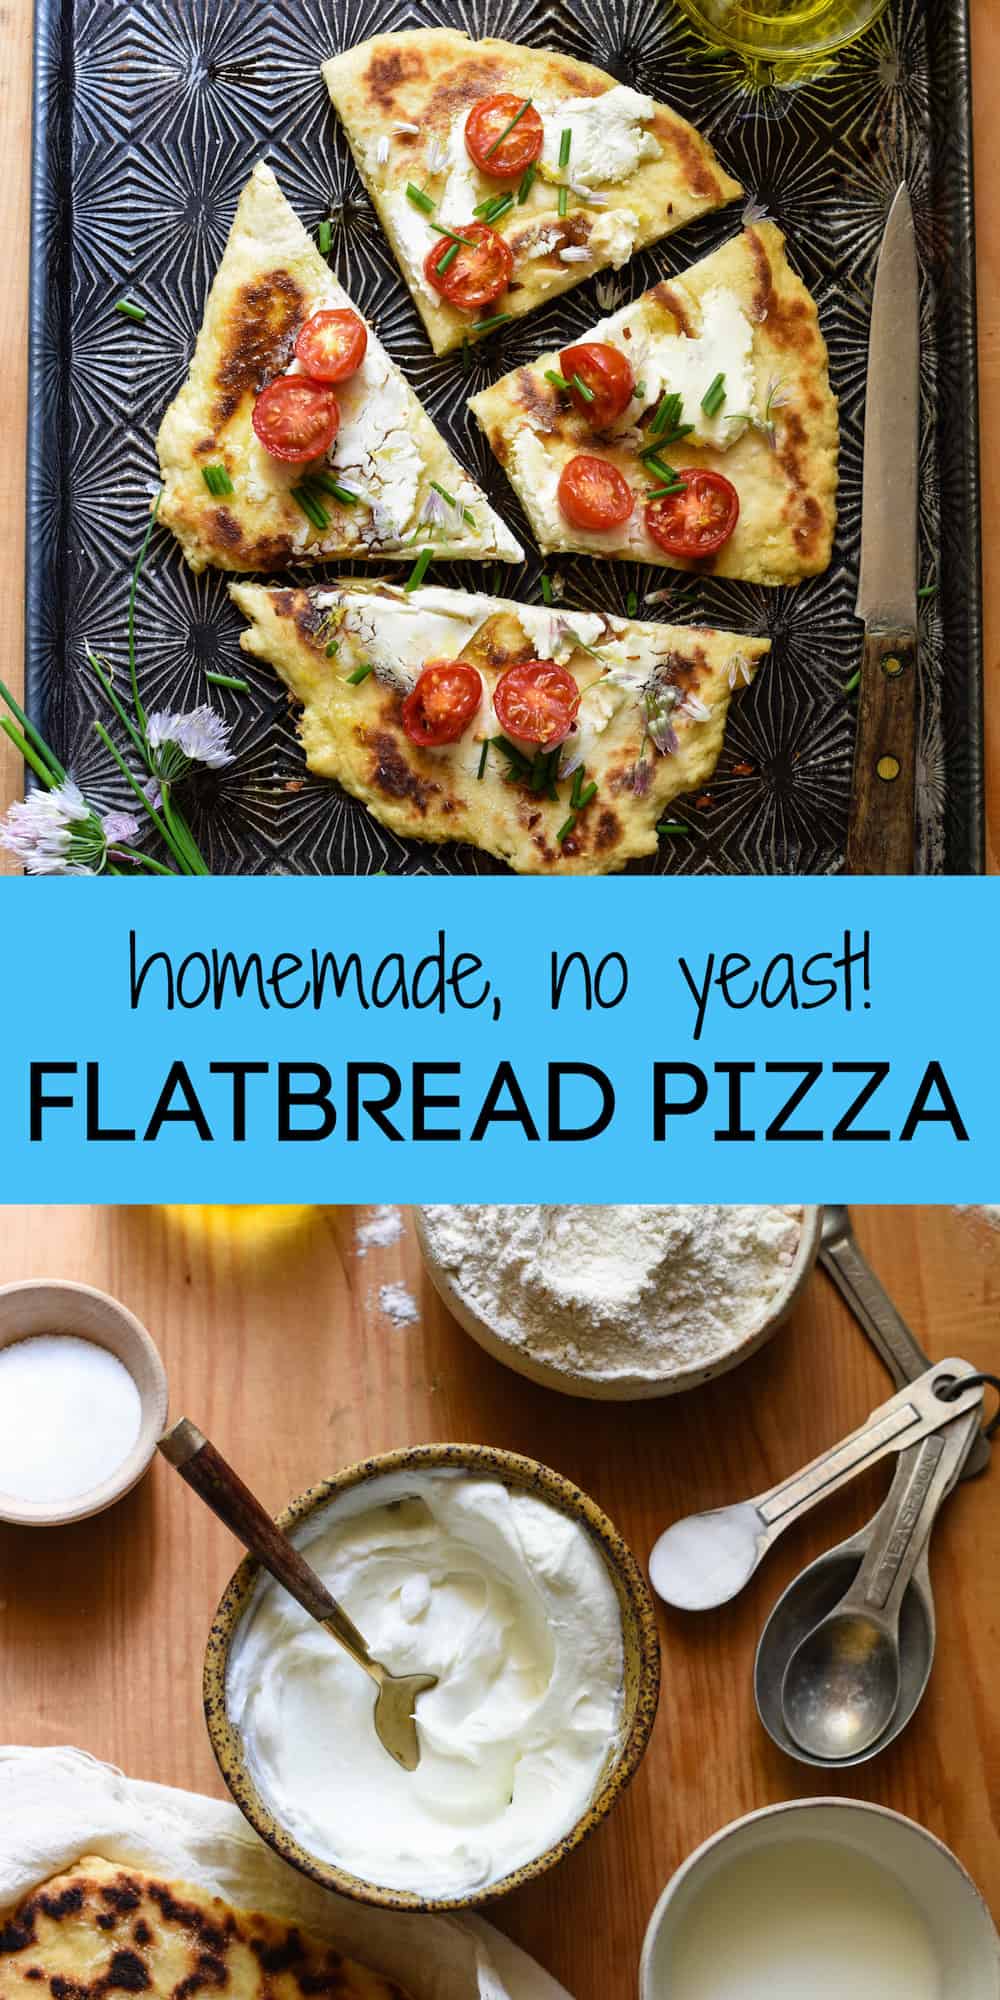 Collage of images of homemade flatbread pizza and ingredients shot. Blue overlay: "homemade, no yeast!" FLATBREAD PIZZA